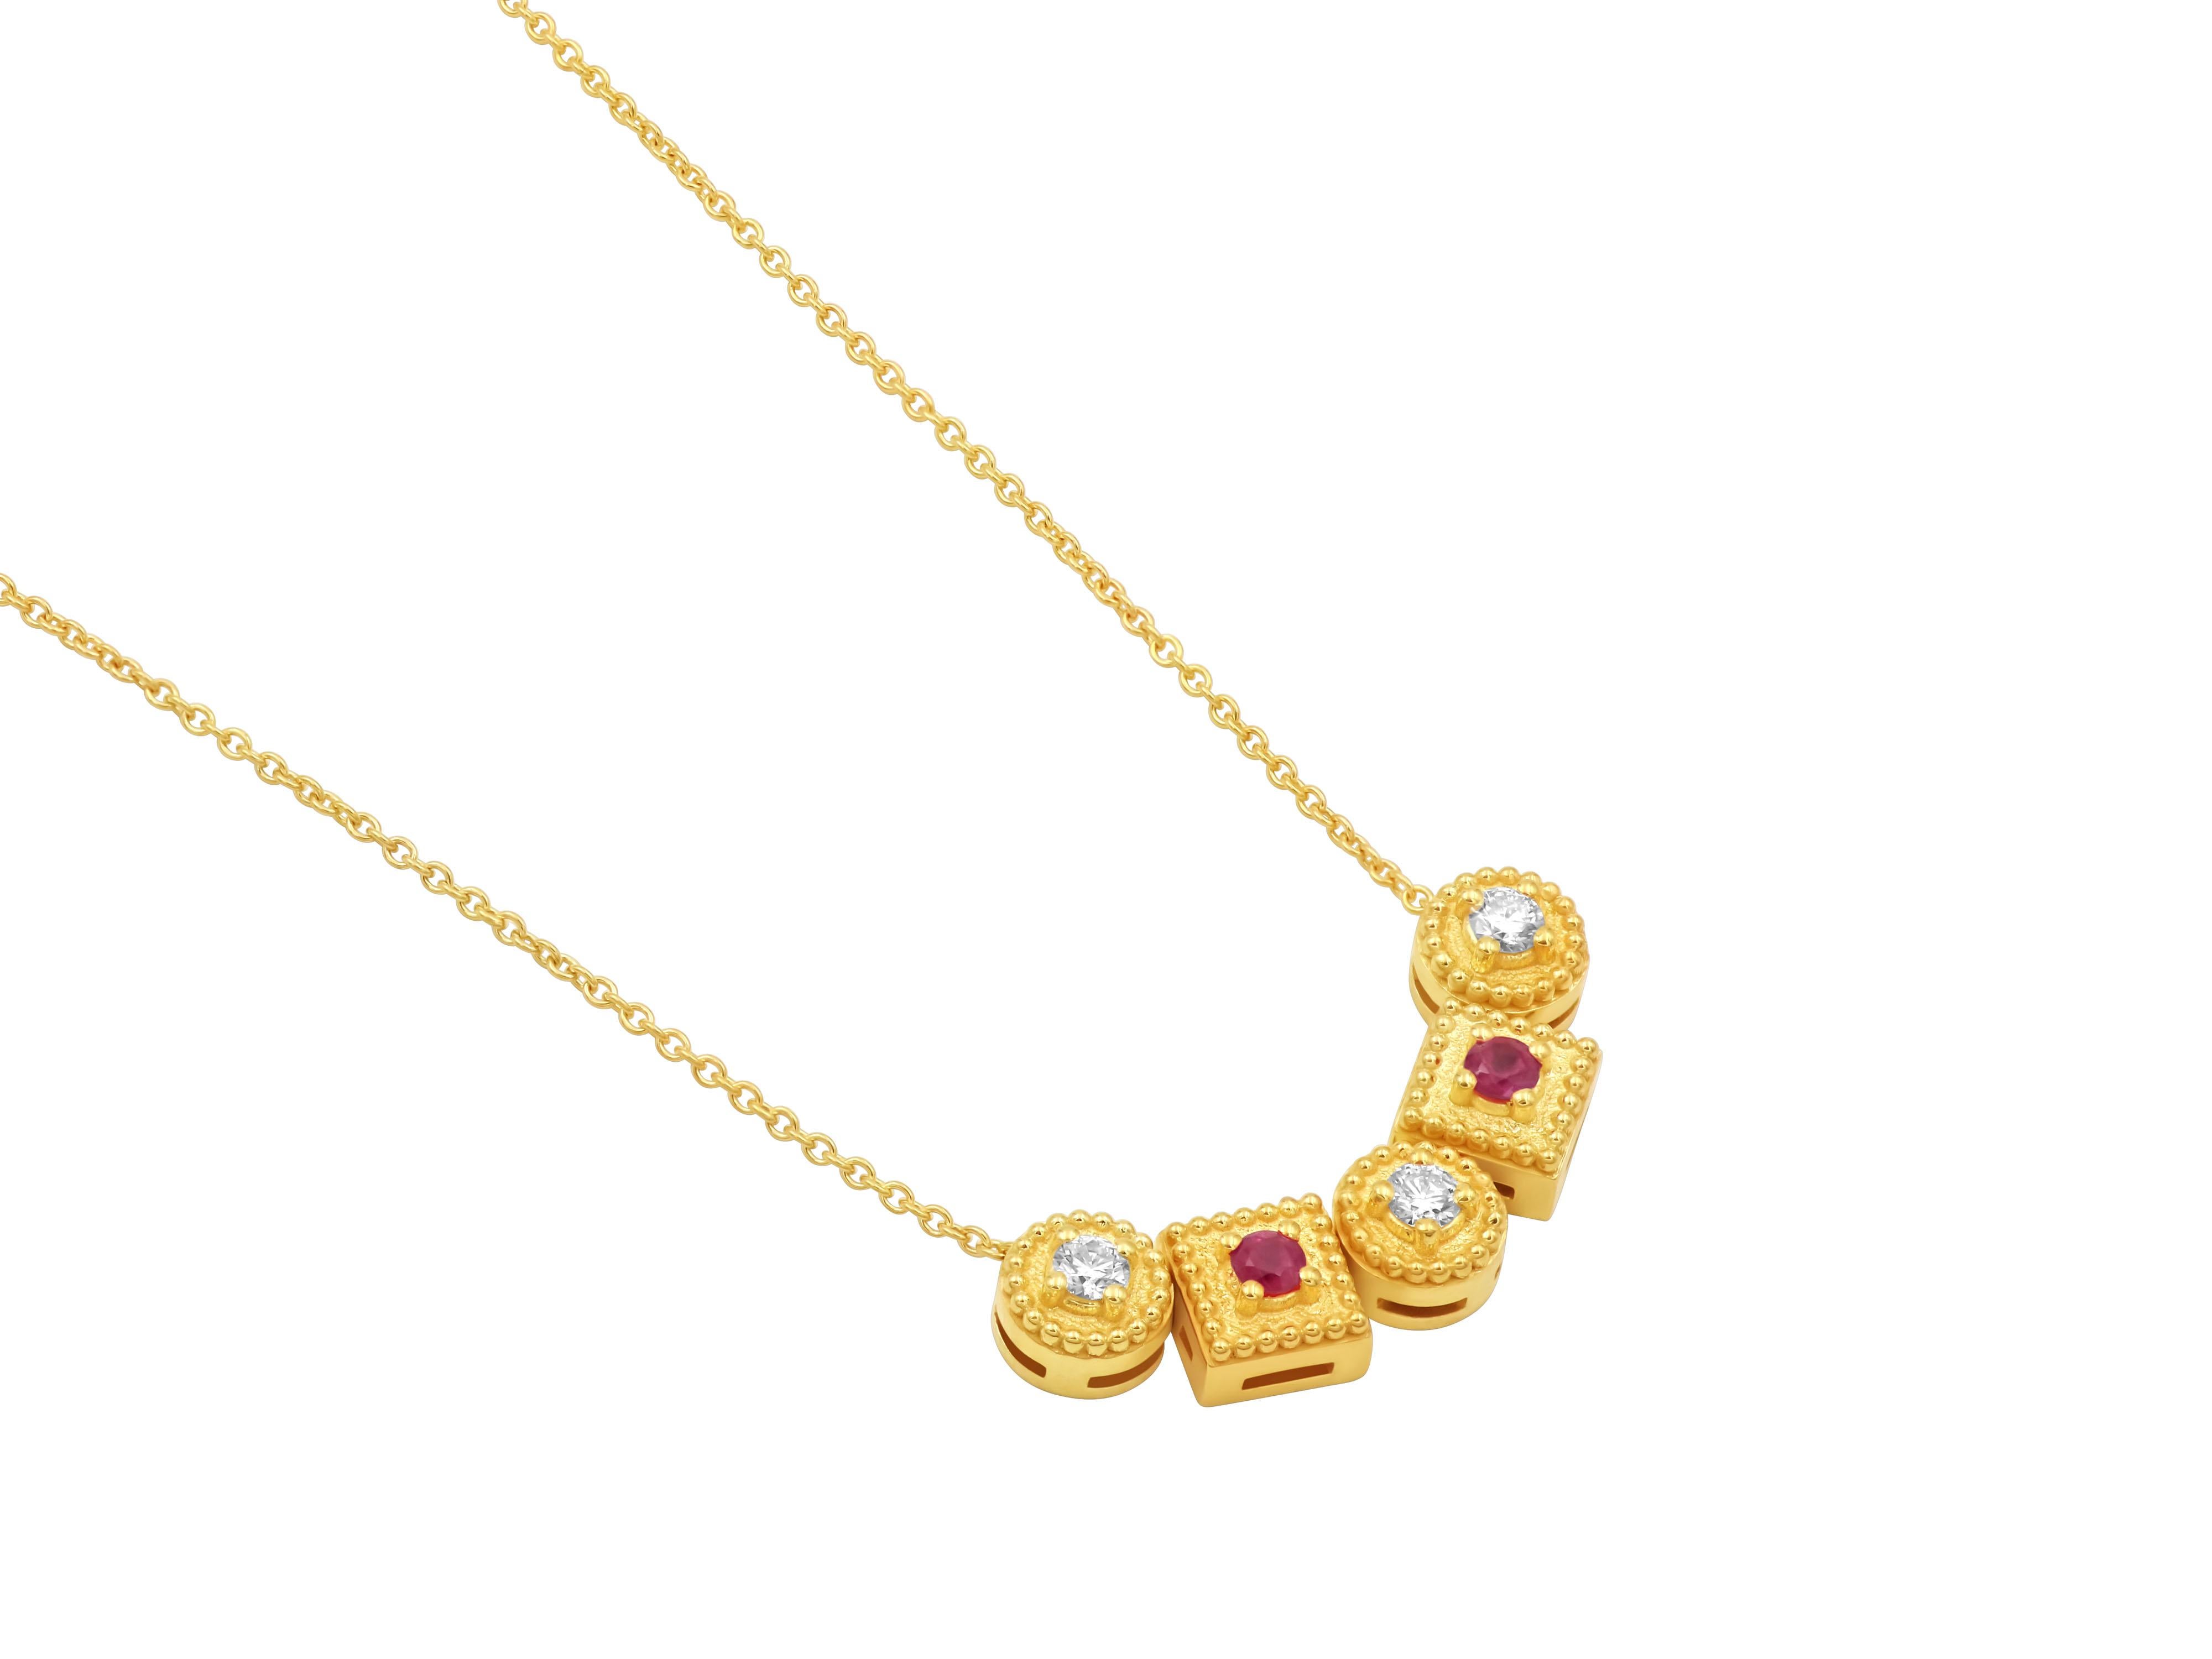 Greek granulated neoclassic necklace in 18k gold with 0.30 carats brilliant cut diamonds and 0.26 carats rubies that combines classical aesthetics with modern techniques. The neoclassic design of the ring takes inspiration from Ancient Greek art,